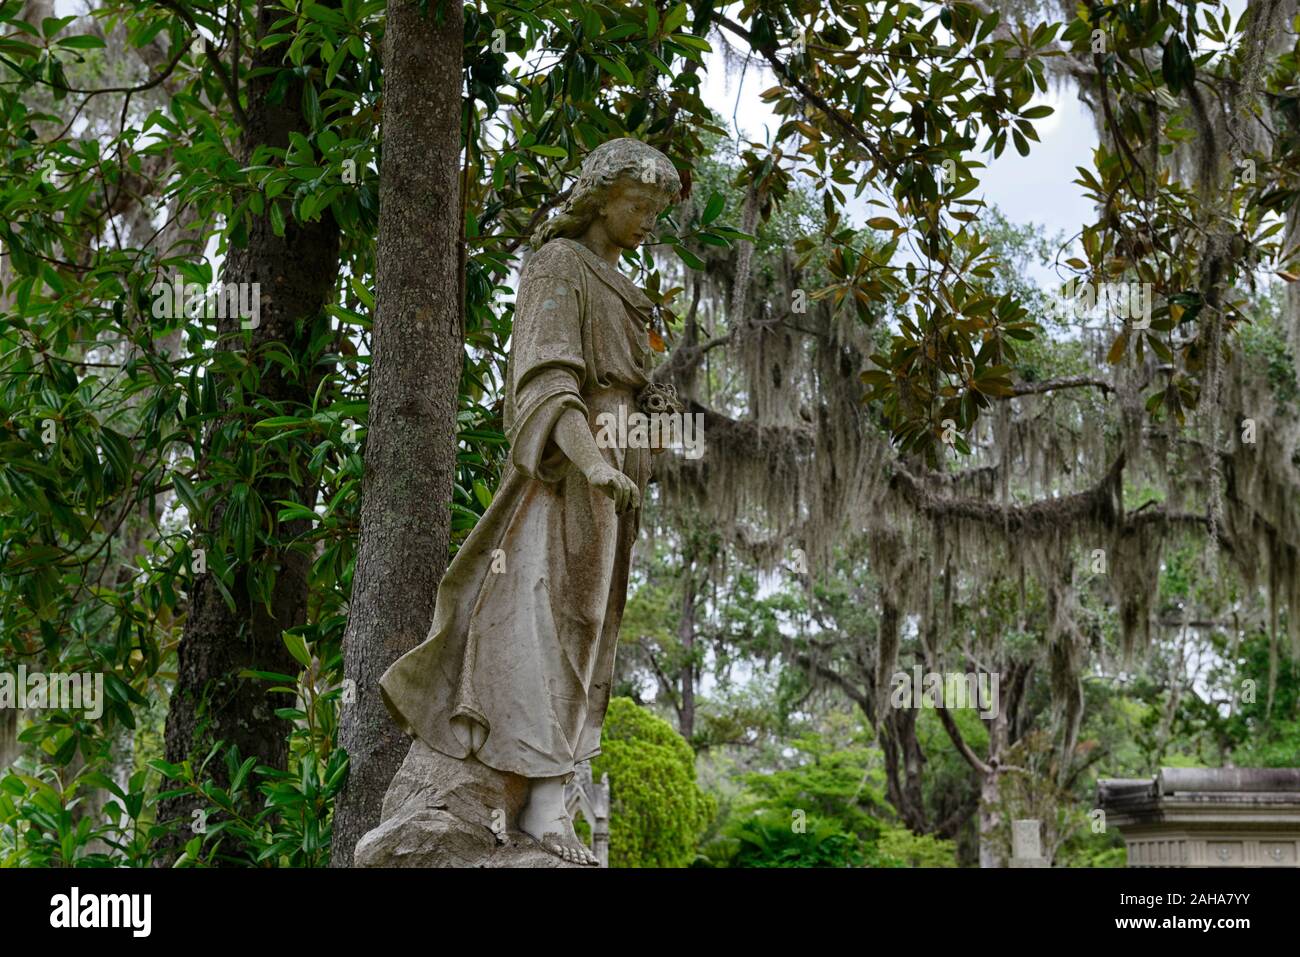 Angel statue,looking down on,Graveyard,graves,grave,tombstone,tombstones,cemeteries,historical site,Live Oaks,Quercus virginiana,Spanish Moss,Tilandsi Stock Photo